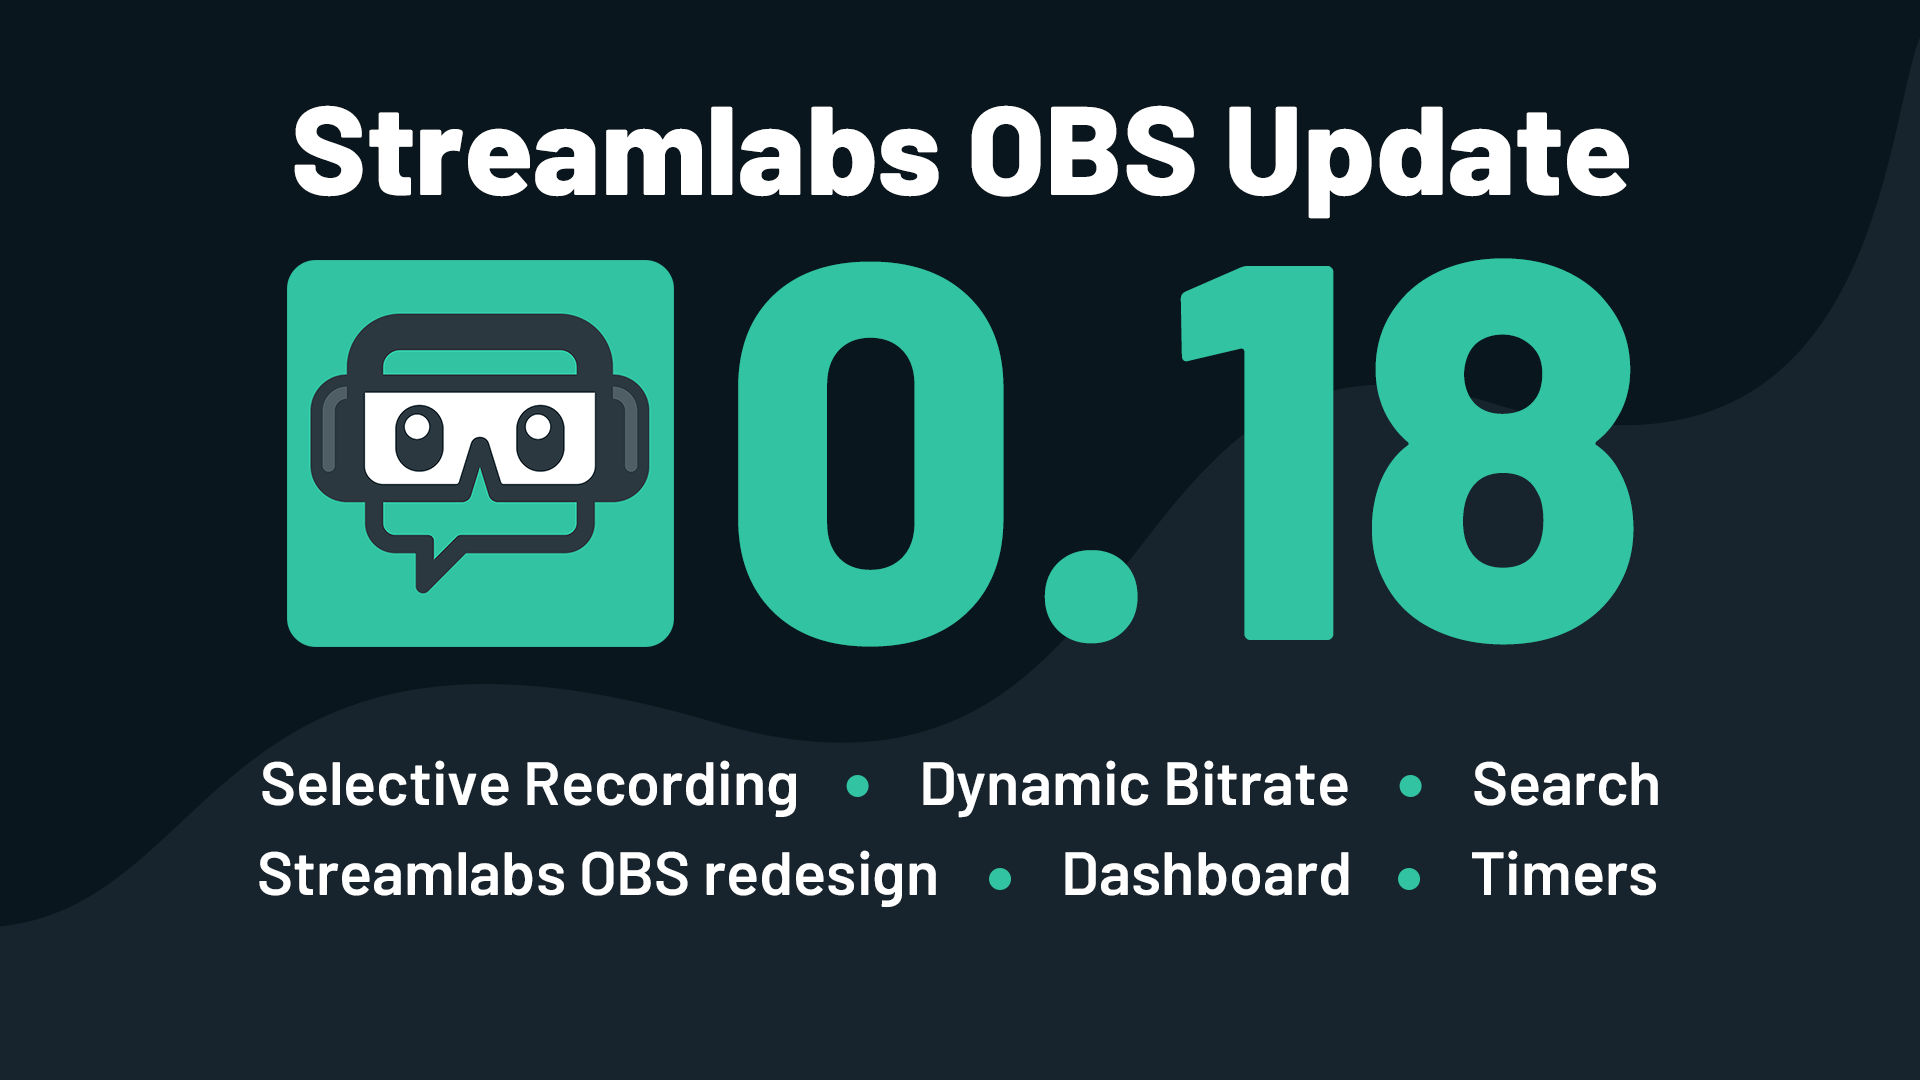 Streamlabs on "The update for Streamlabs OBS is live! We've introduced a variety of game-changing features like Selective Recording and Dynamic Bitrate. Check out our see what's new,